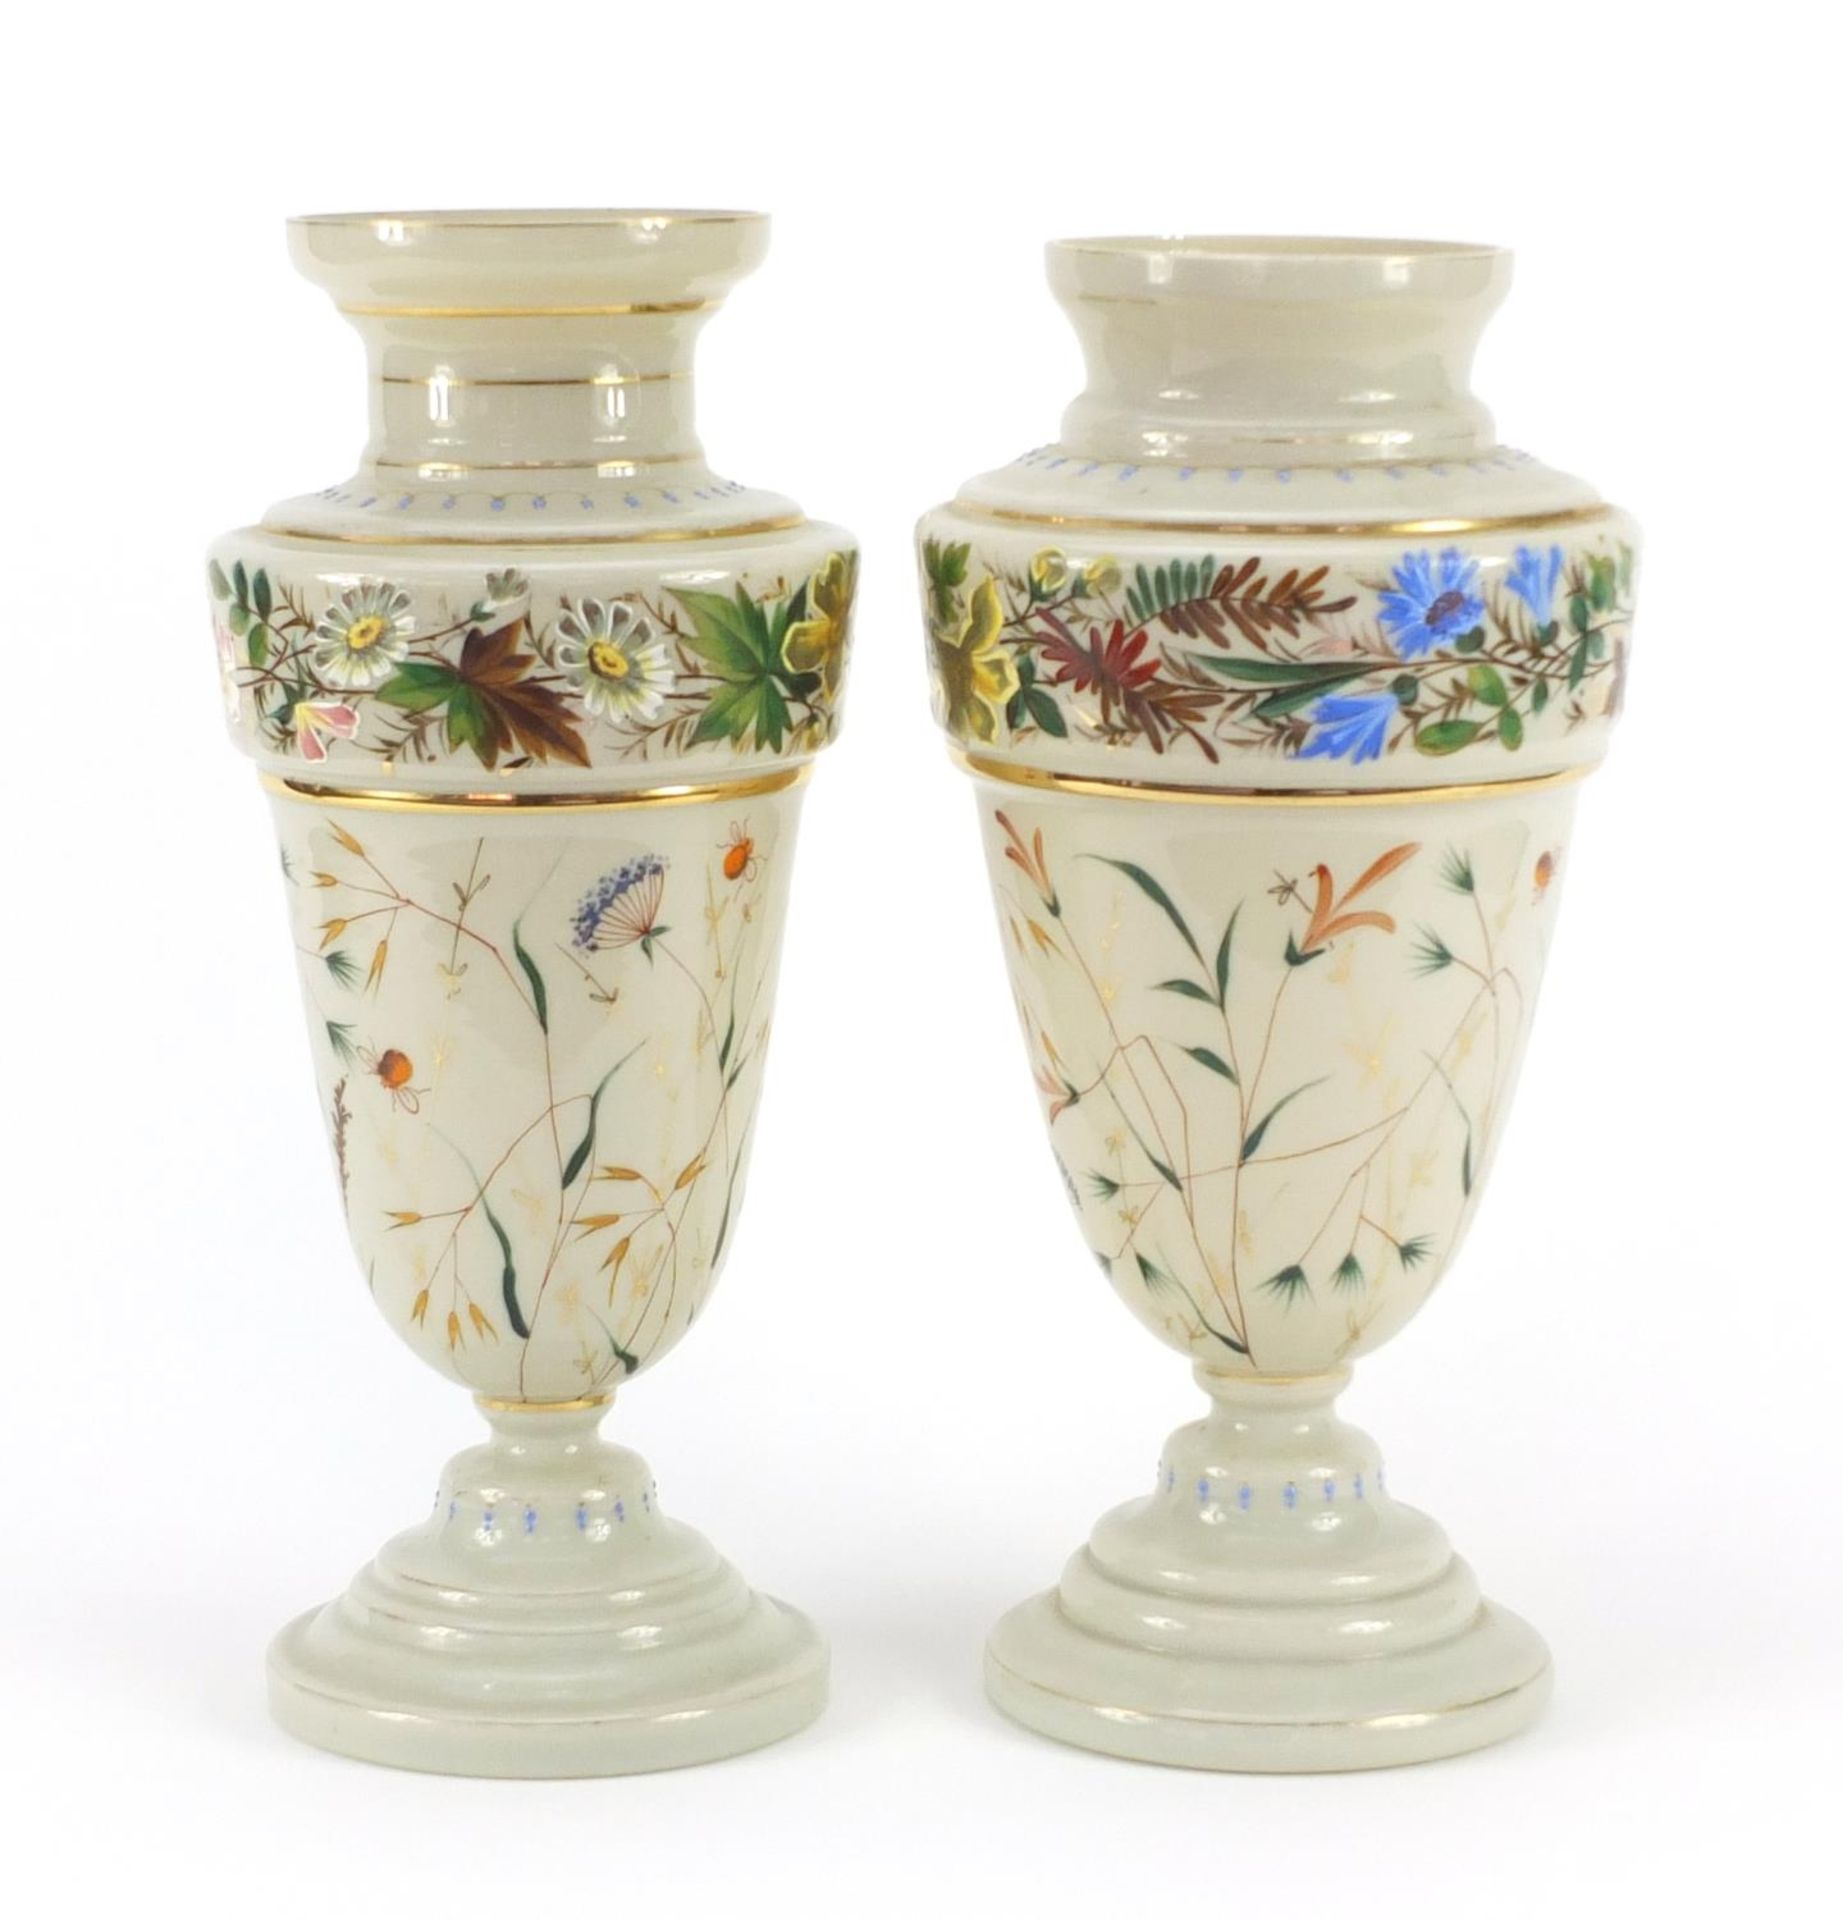 Matched pair of 19th century opaline glass vases, hand painted with flowers and insects amongst - Image 8 of 11